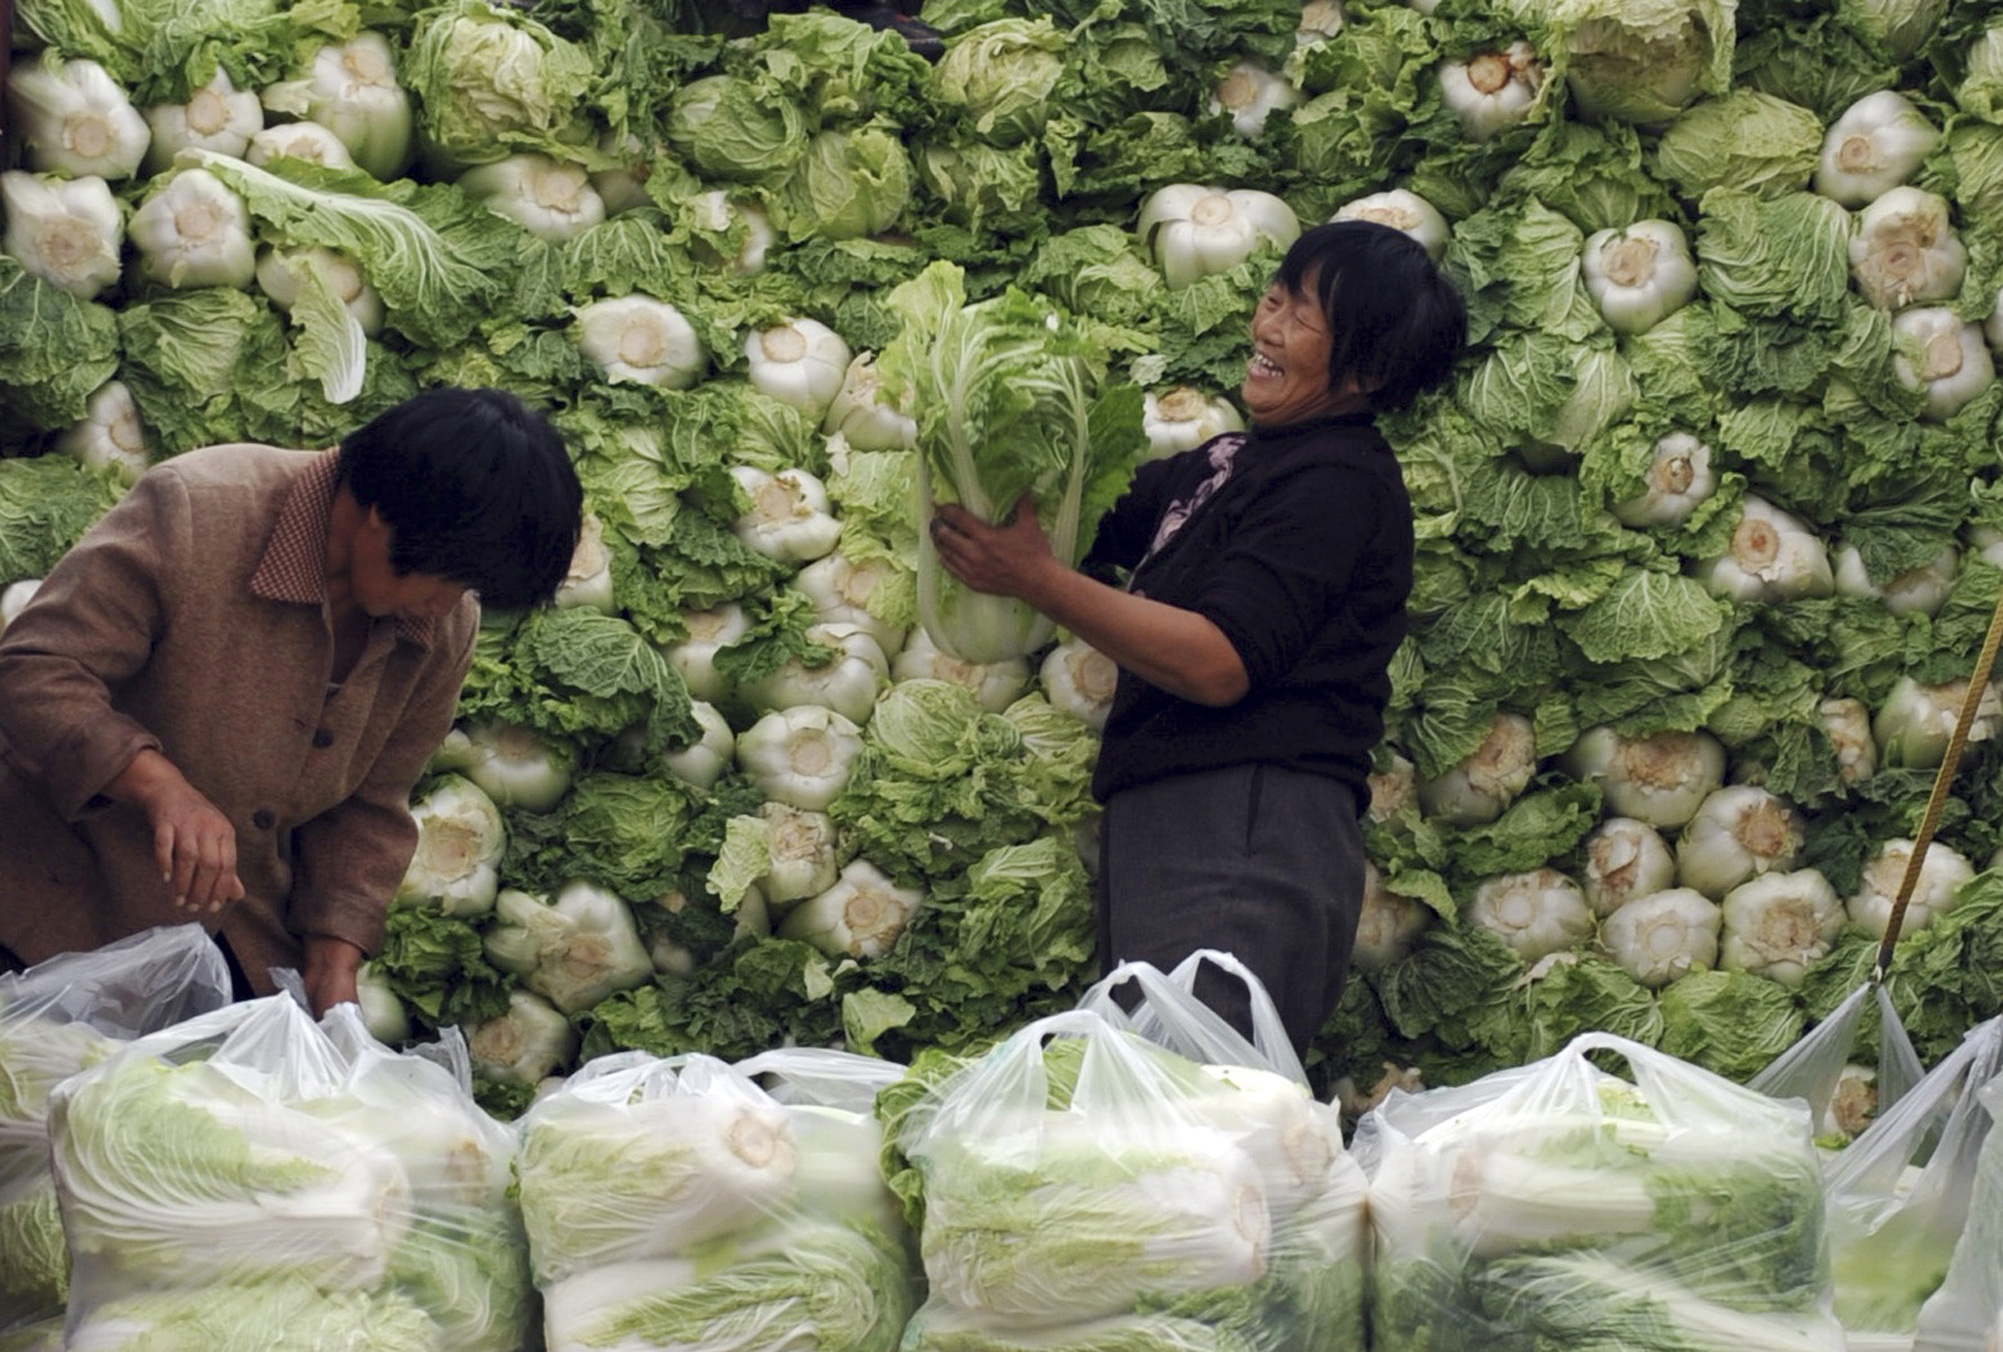 Cabbage - a Chinese superfood. Photo: AP